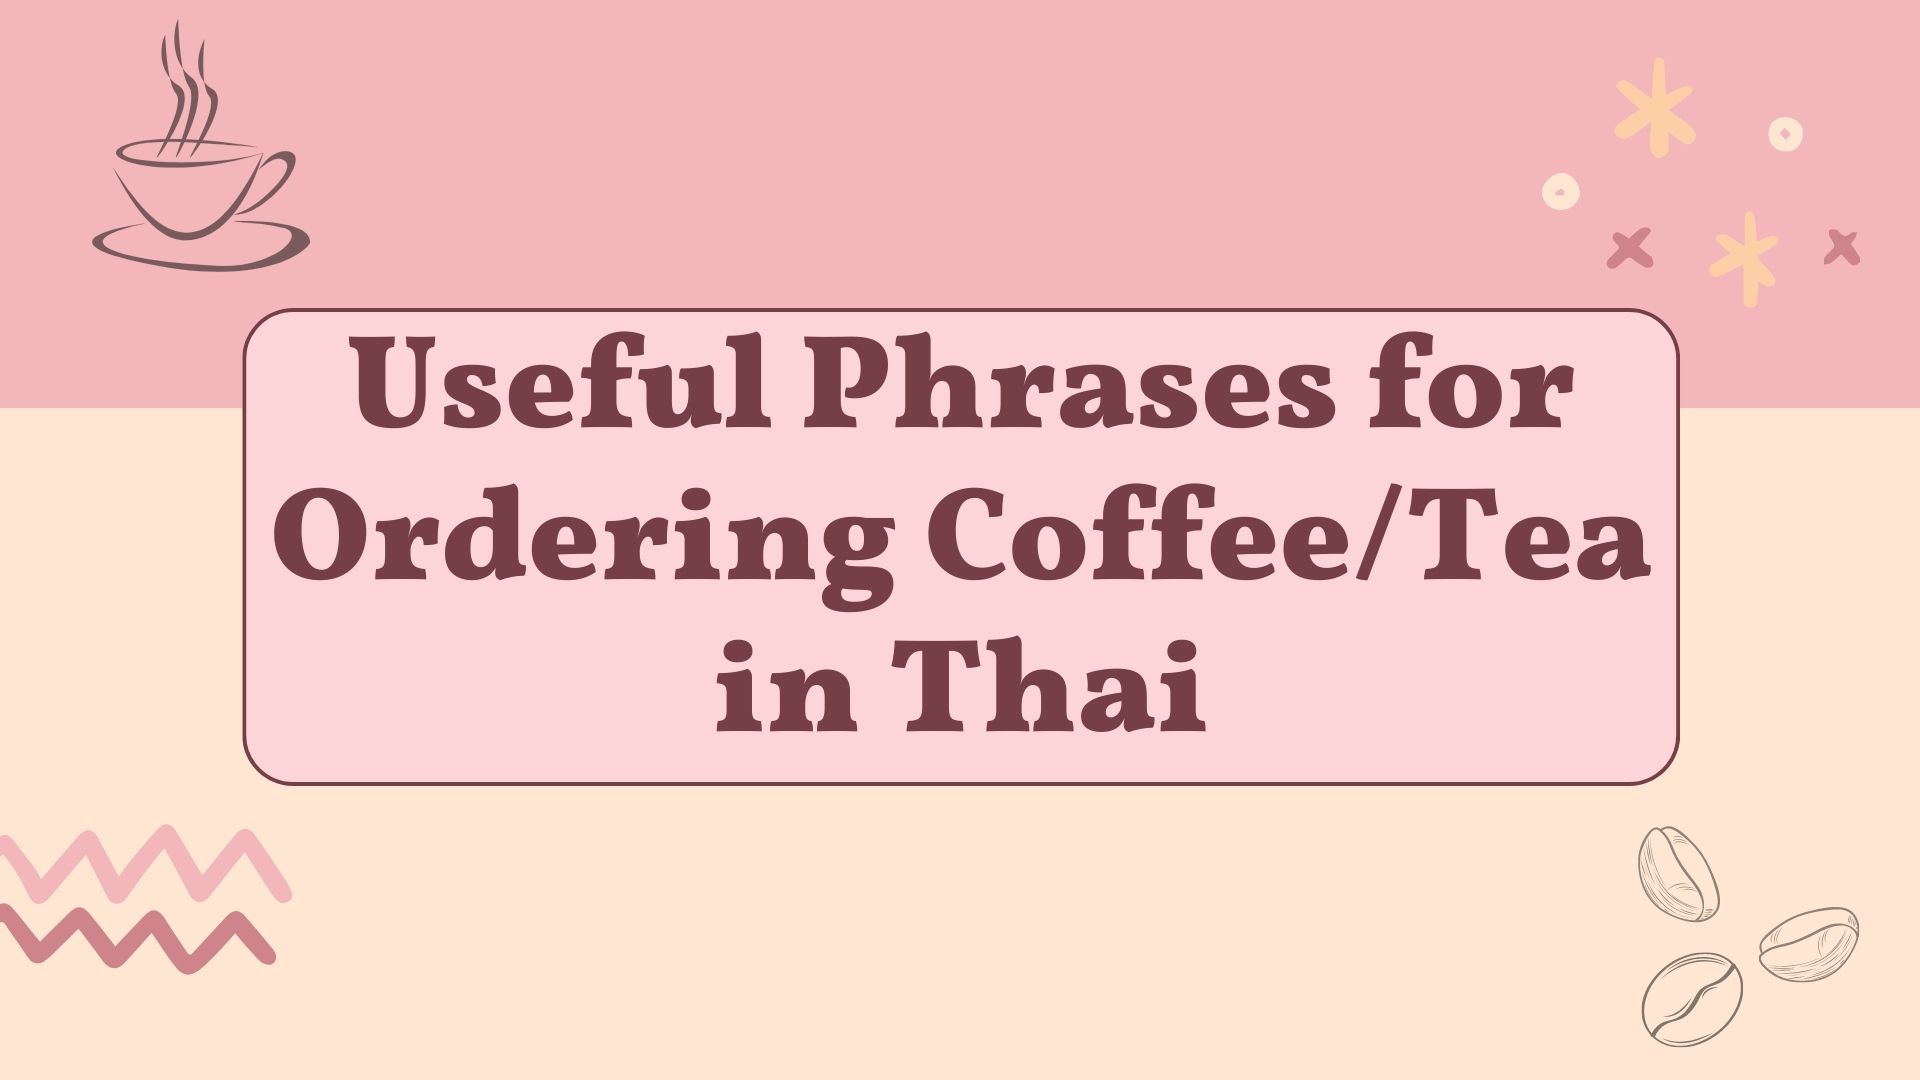 How To Order Coffee In Thai Language 2